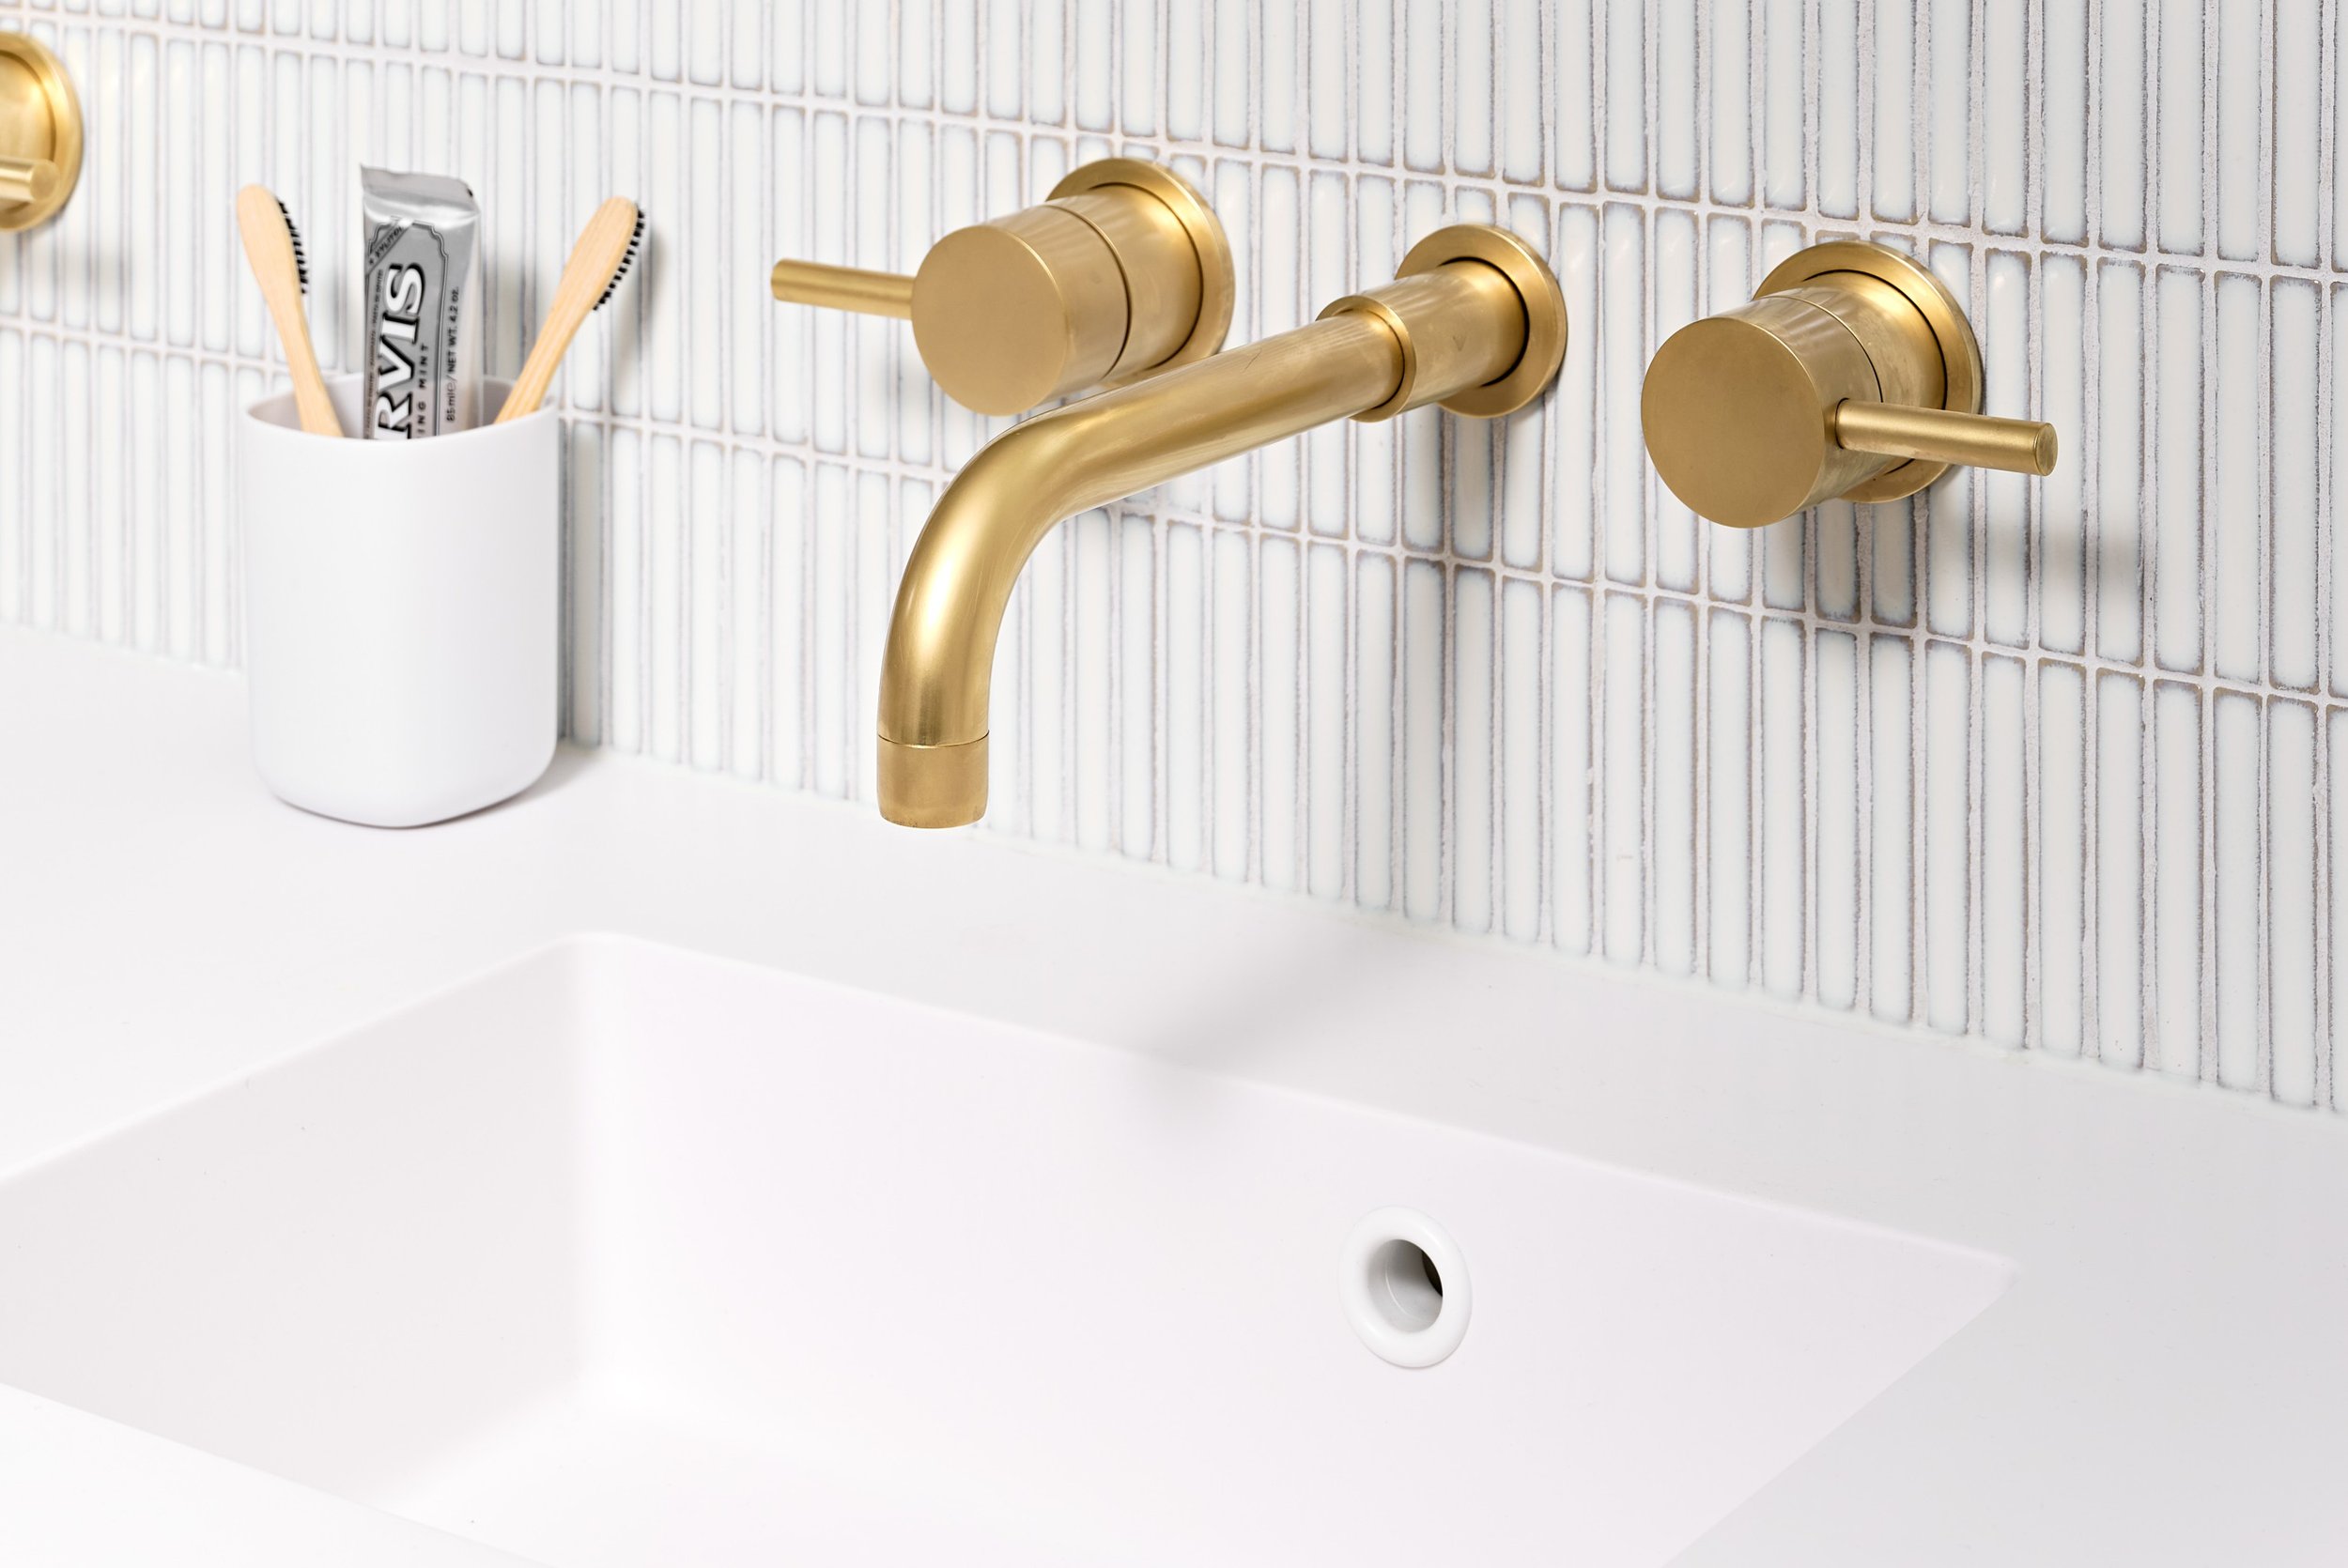 brushed-gold-taps-with-white-basin.jpg